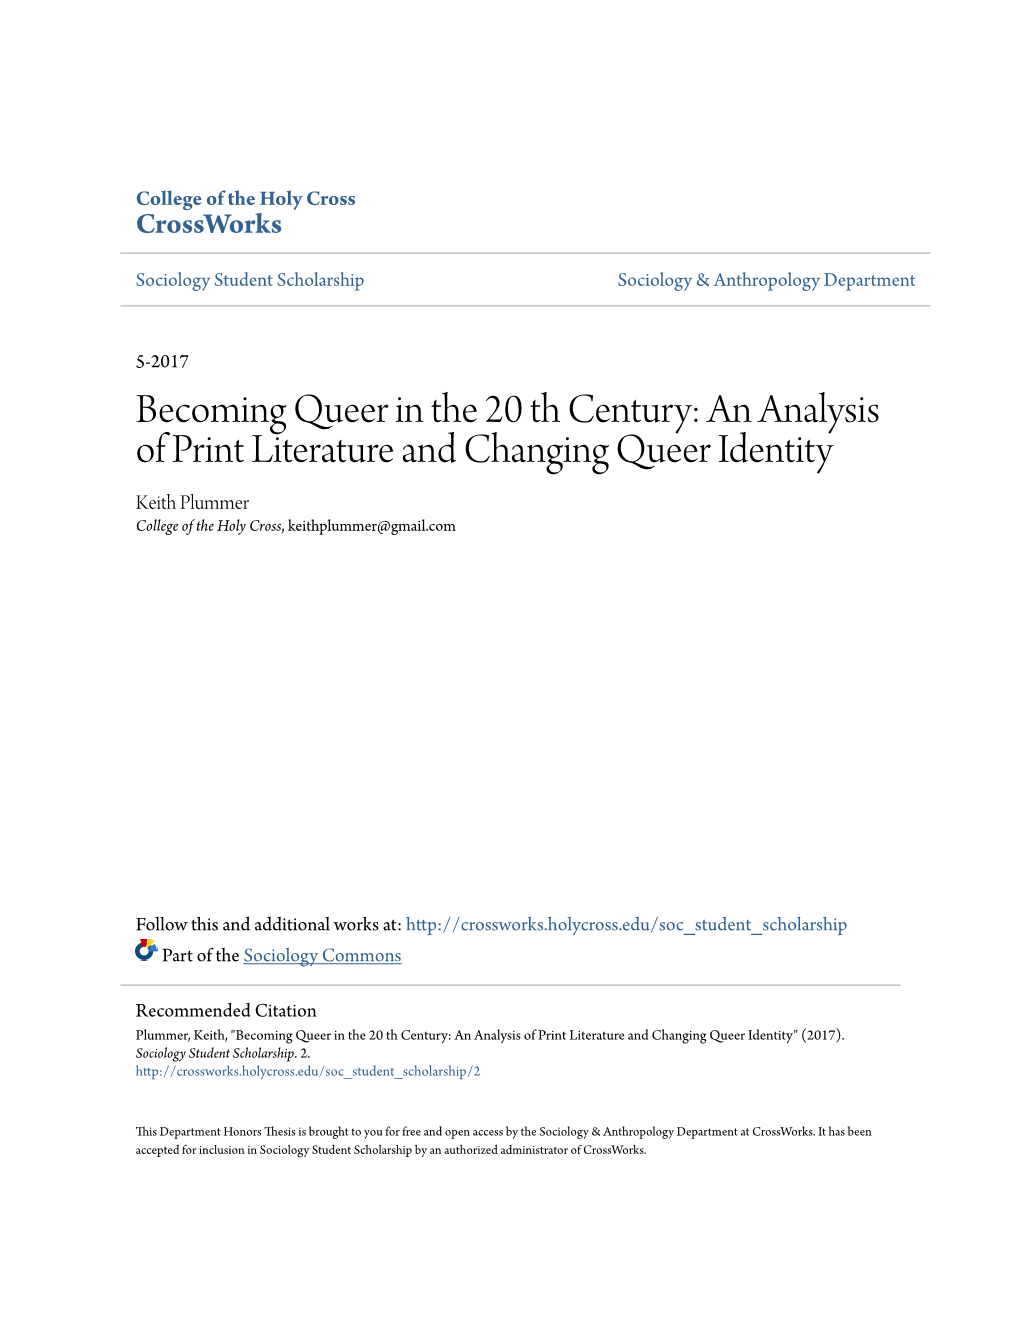 Becoming Queer in the 20 Th Century: an Analysis of Print Literature and Changing Queer Identity Keith Plummer College of the Holy Cross, Keithplummer@Gmail.Com